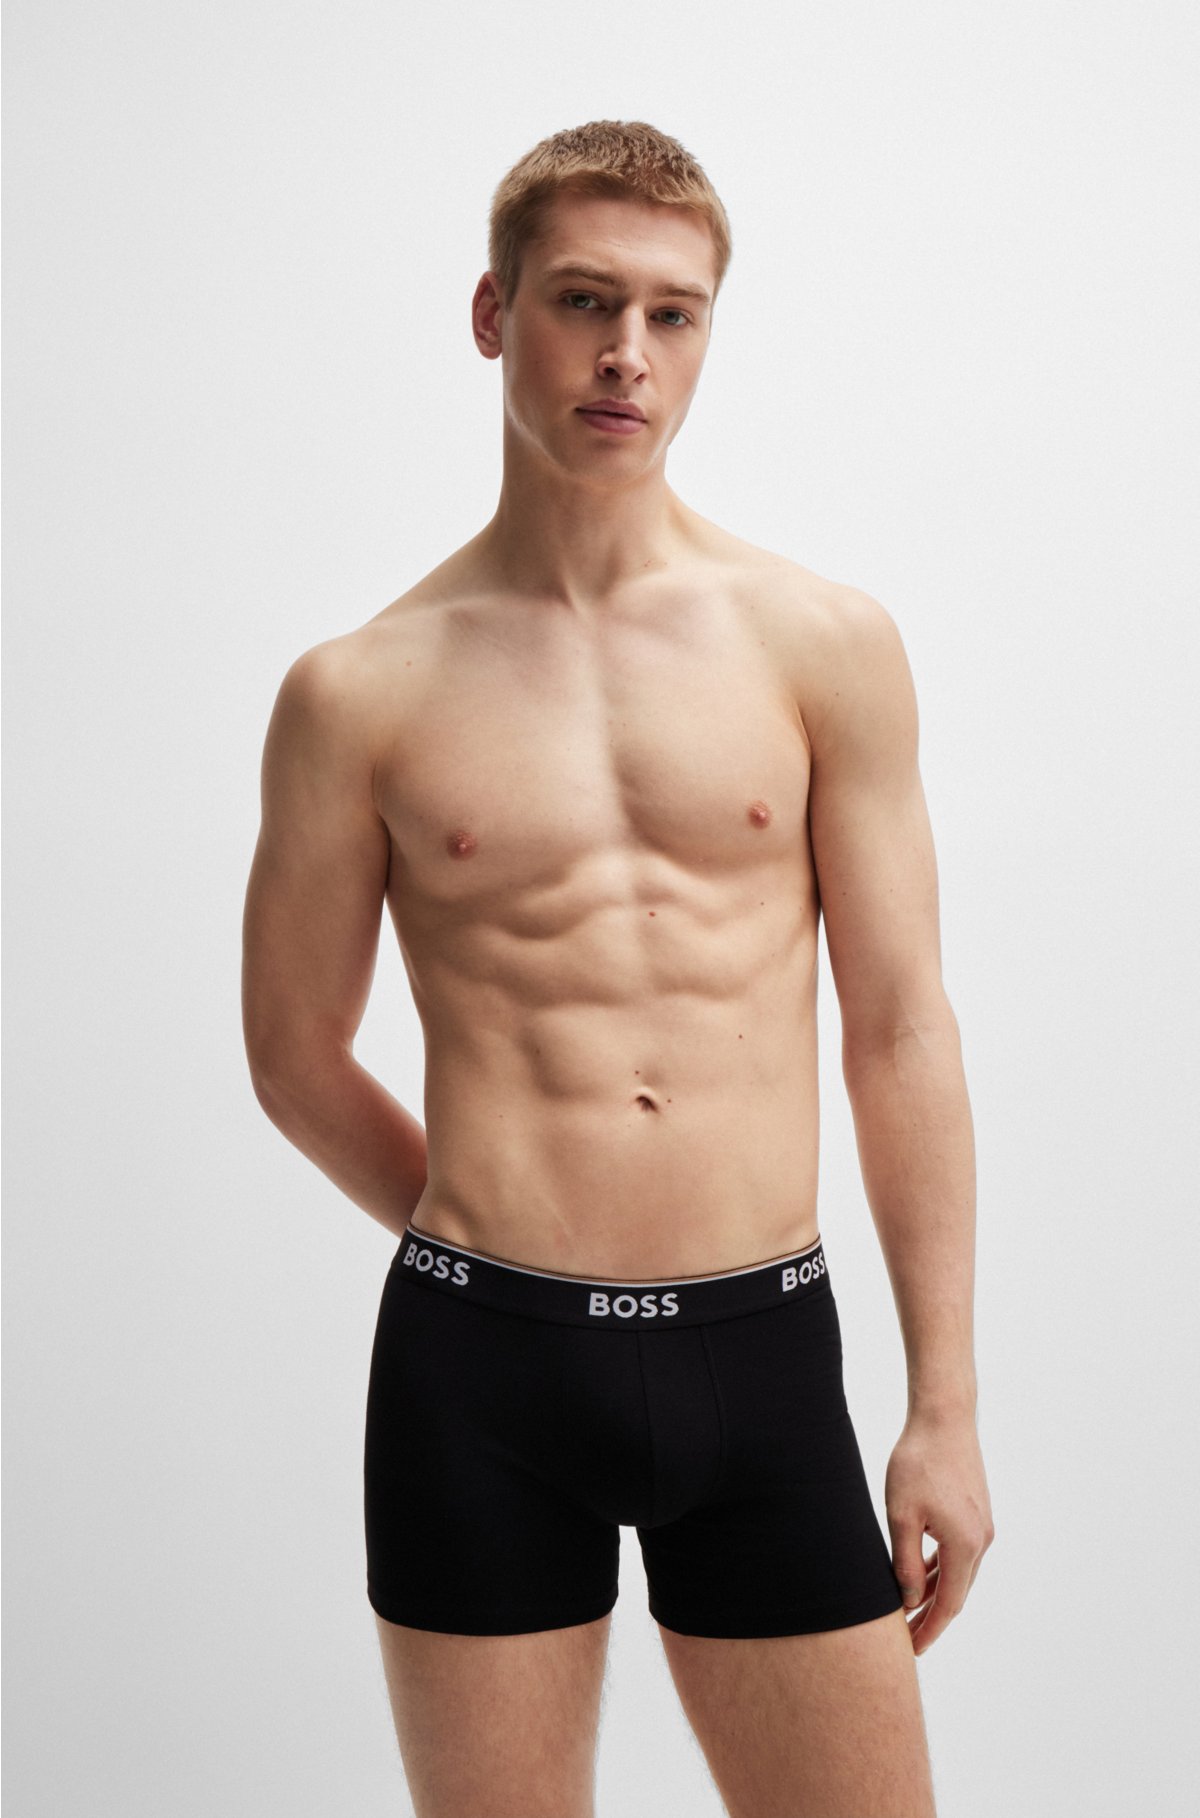 BOSS logos Three-pack of briefs - stretch-cotton boxer with